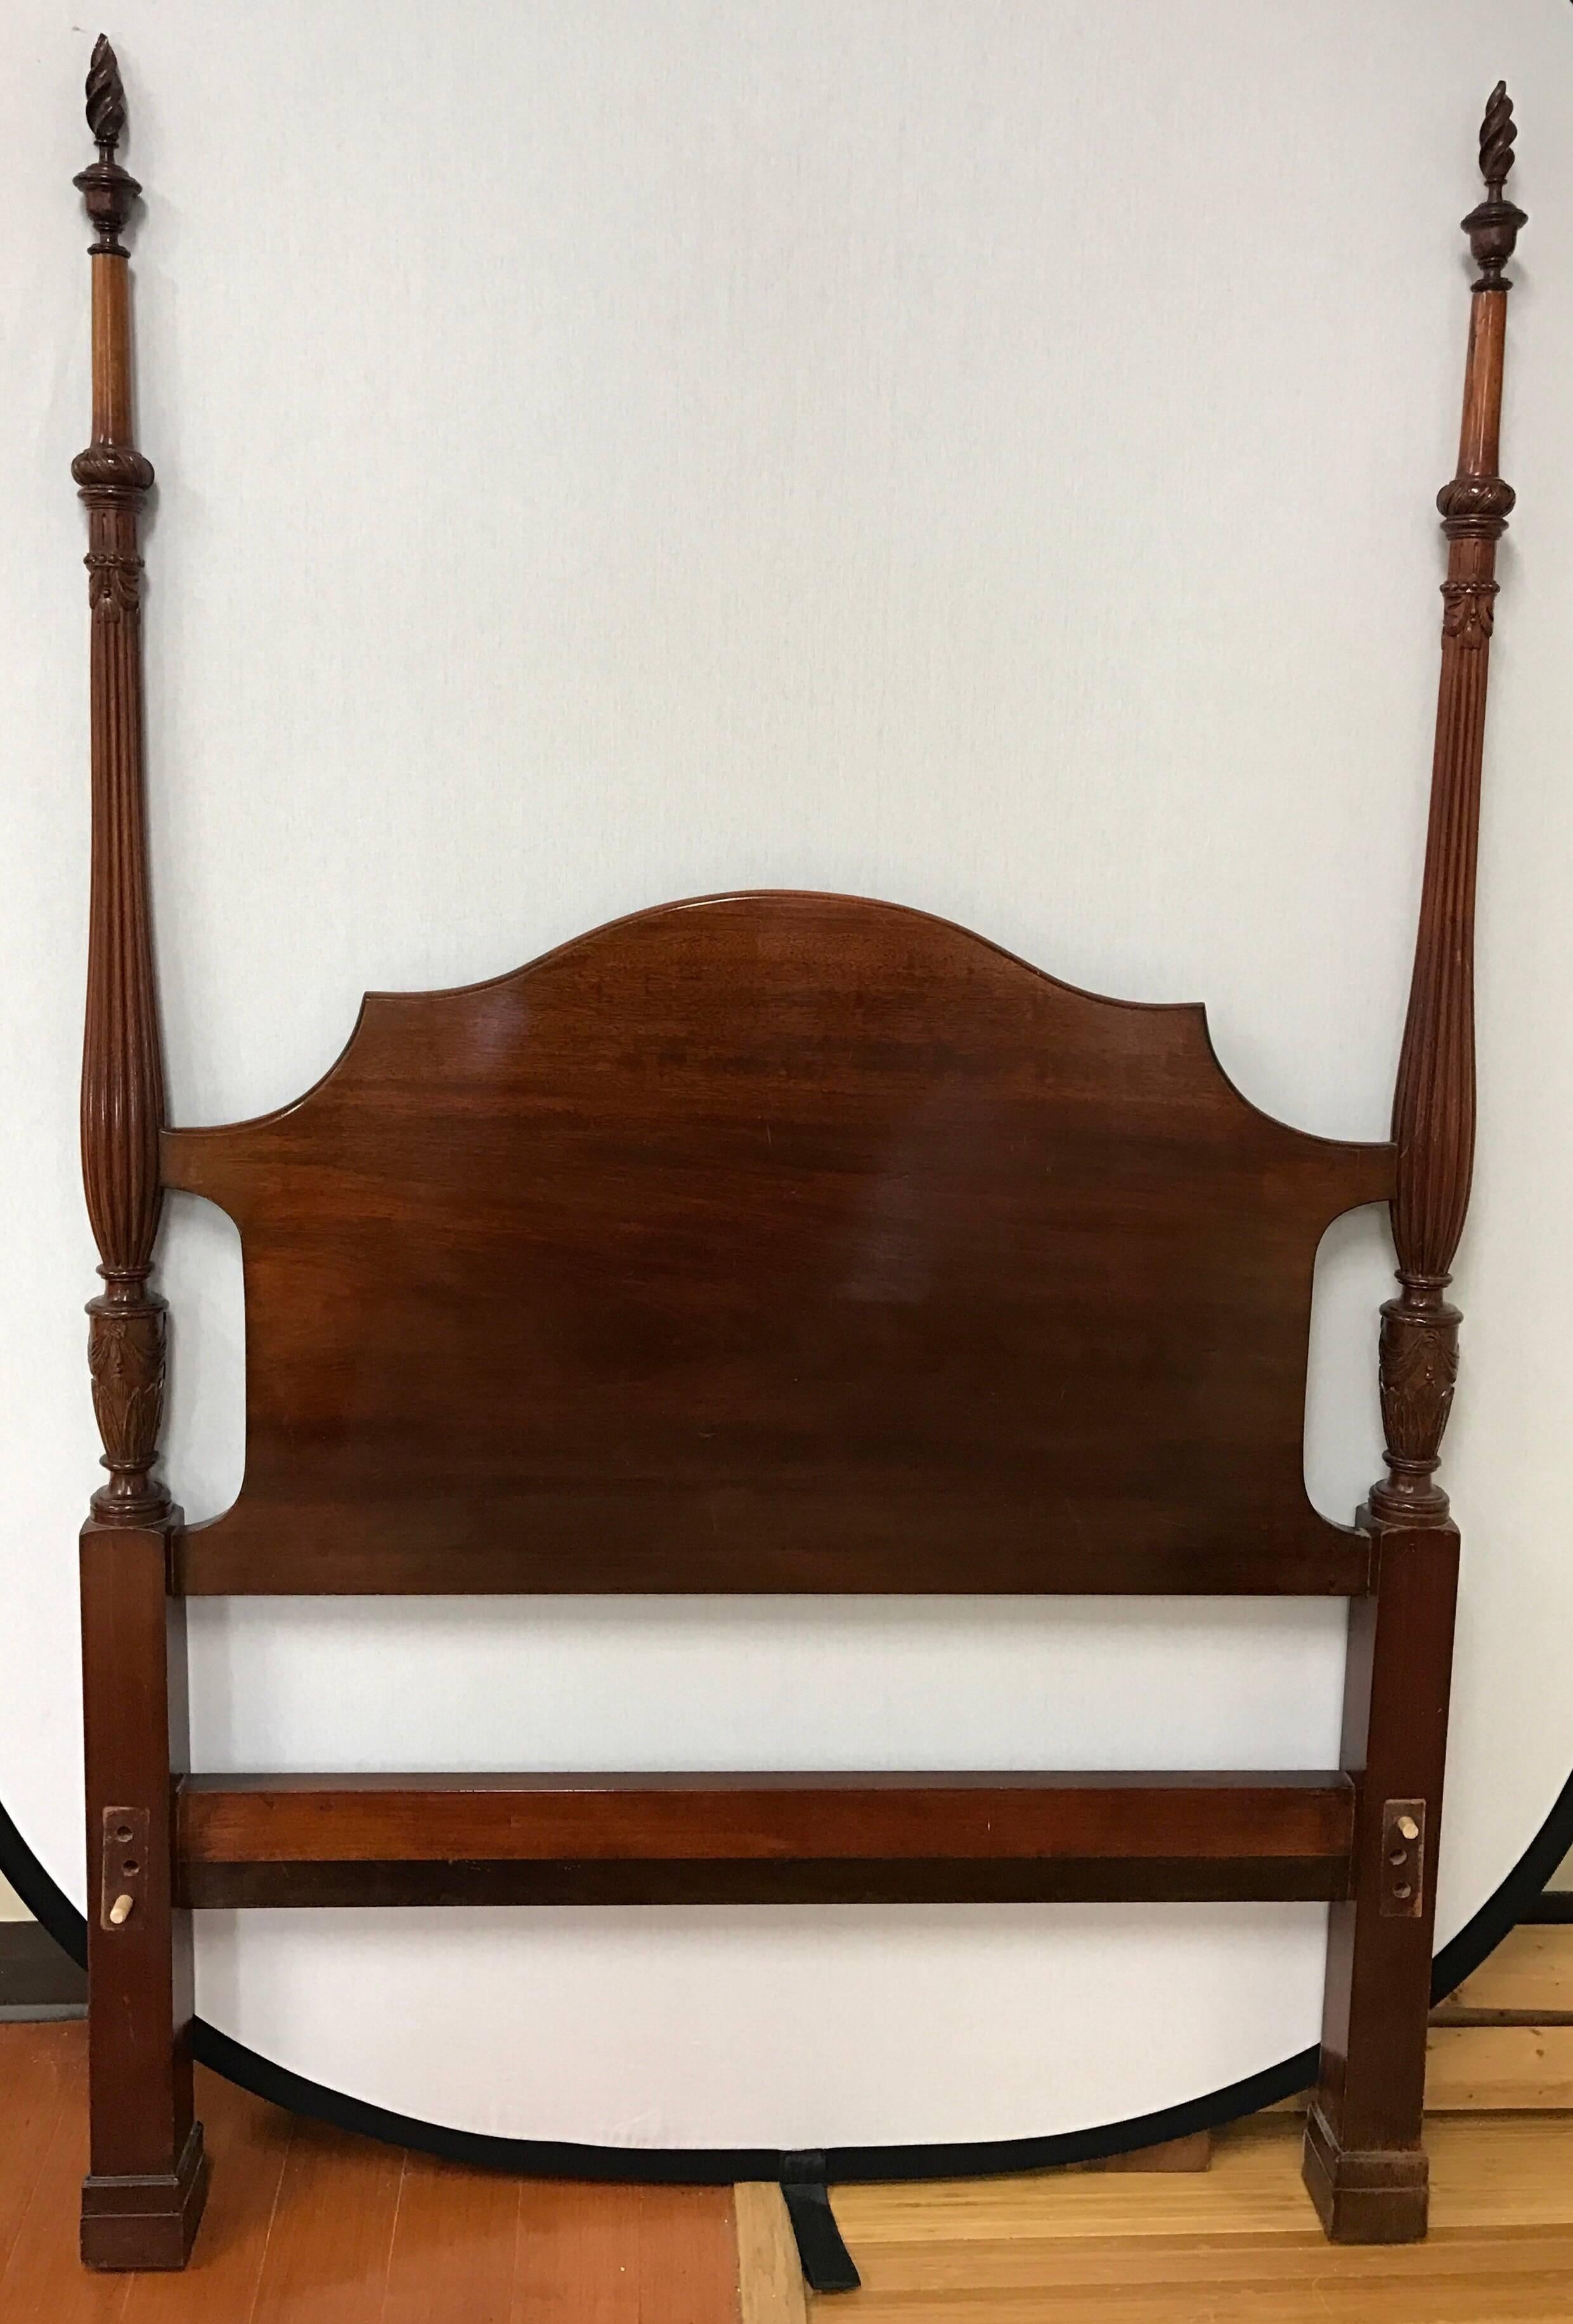 Pair of antique mahogany twin four-poster beds with carved detail and removable finials. Includes rails.